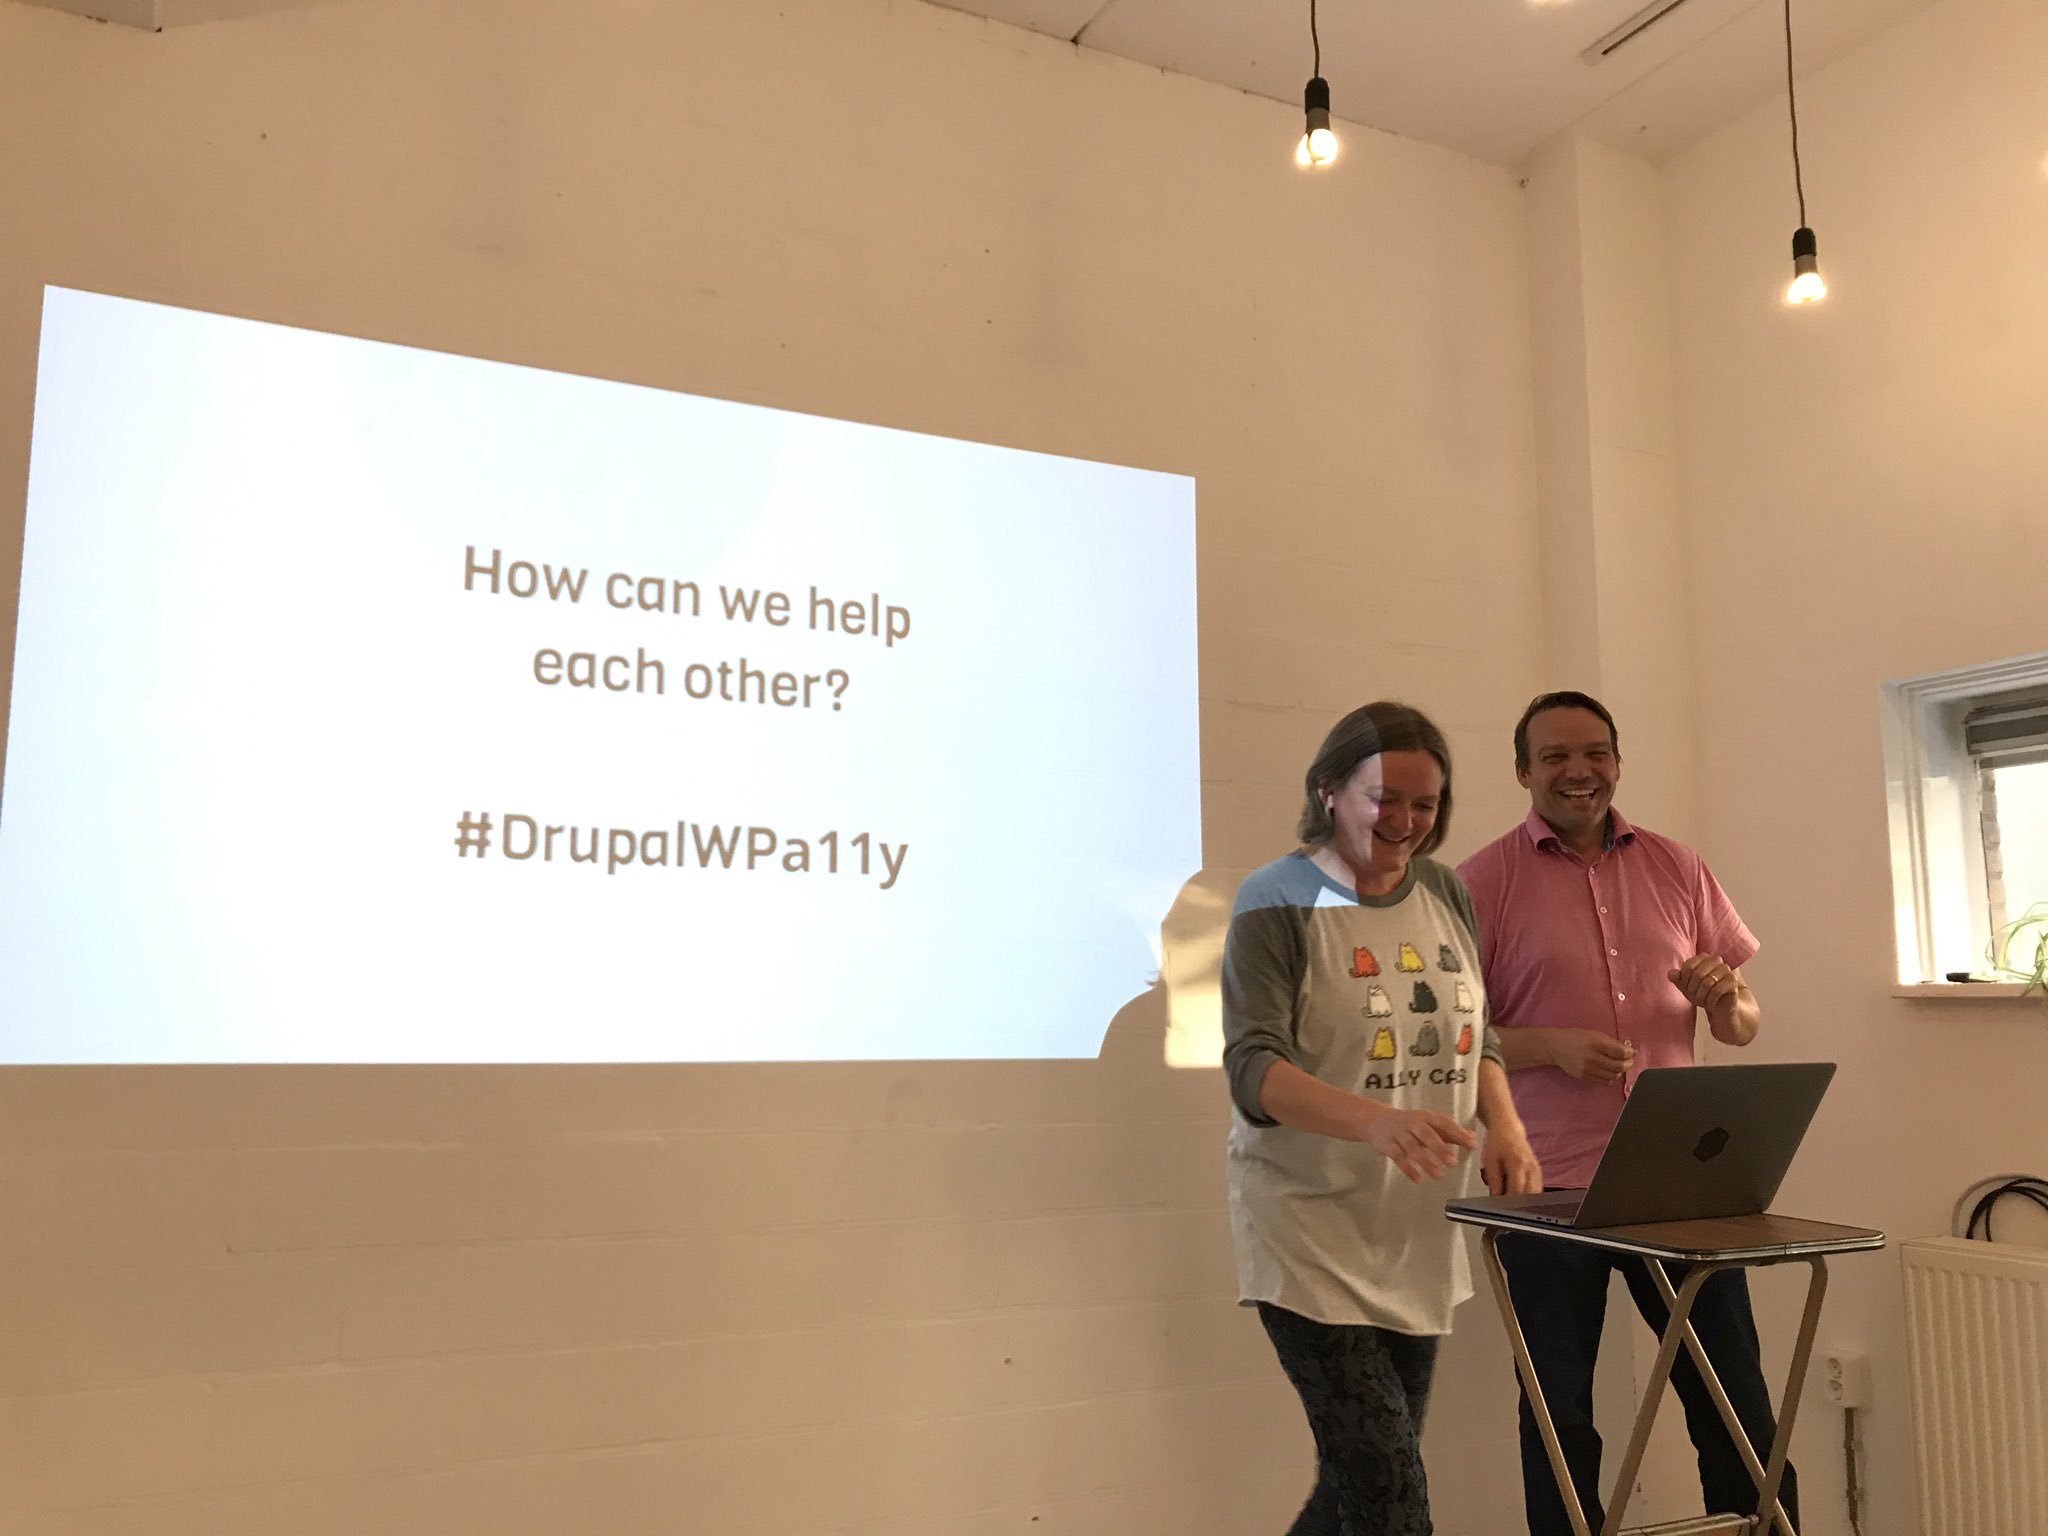 How can we help each other? Hashtag DrupalWPa11y